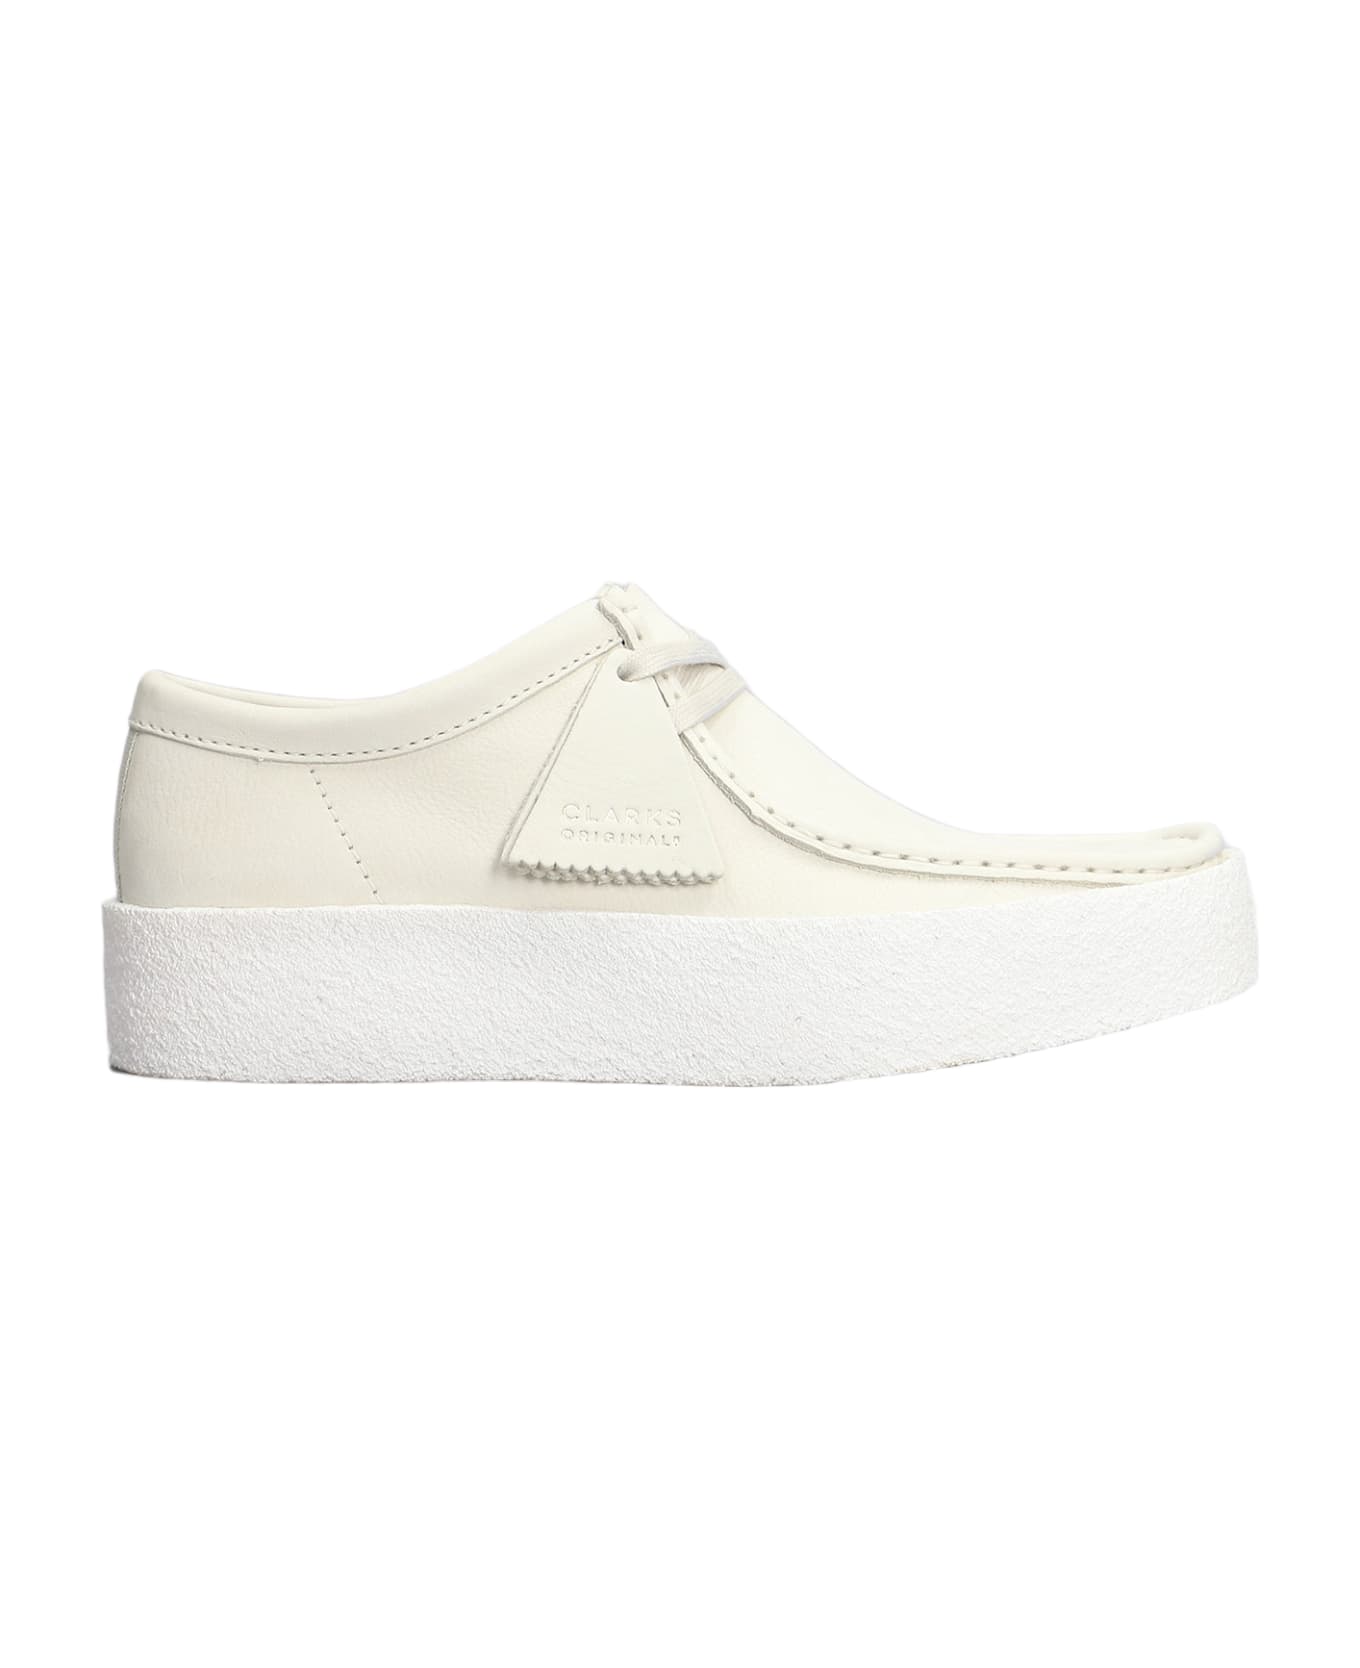 Clarks Wallabee Cup Lace Up Shoes In White Nubuck - white